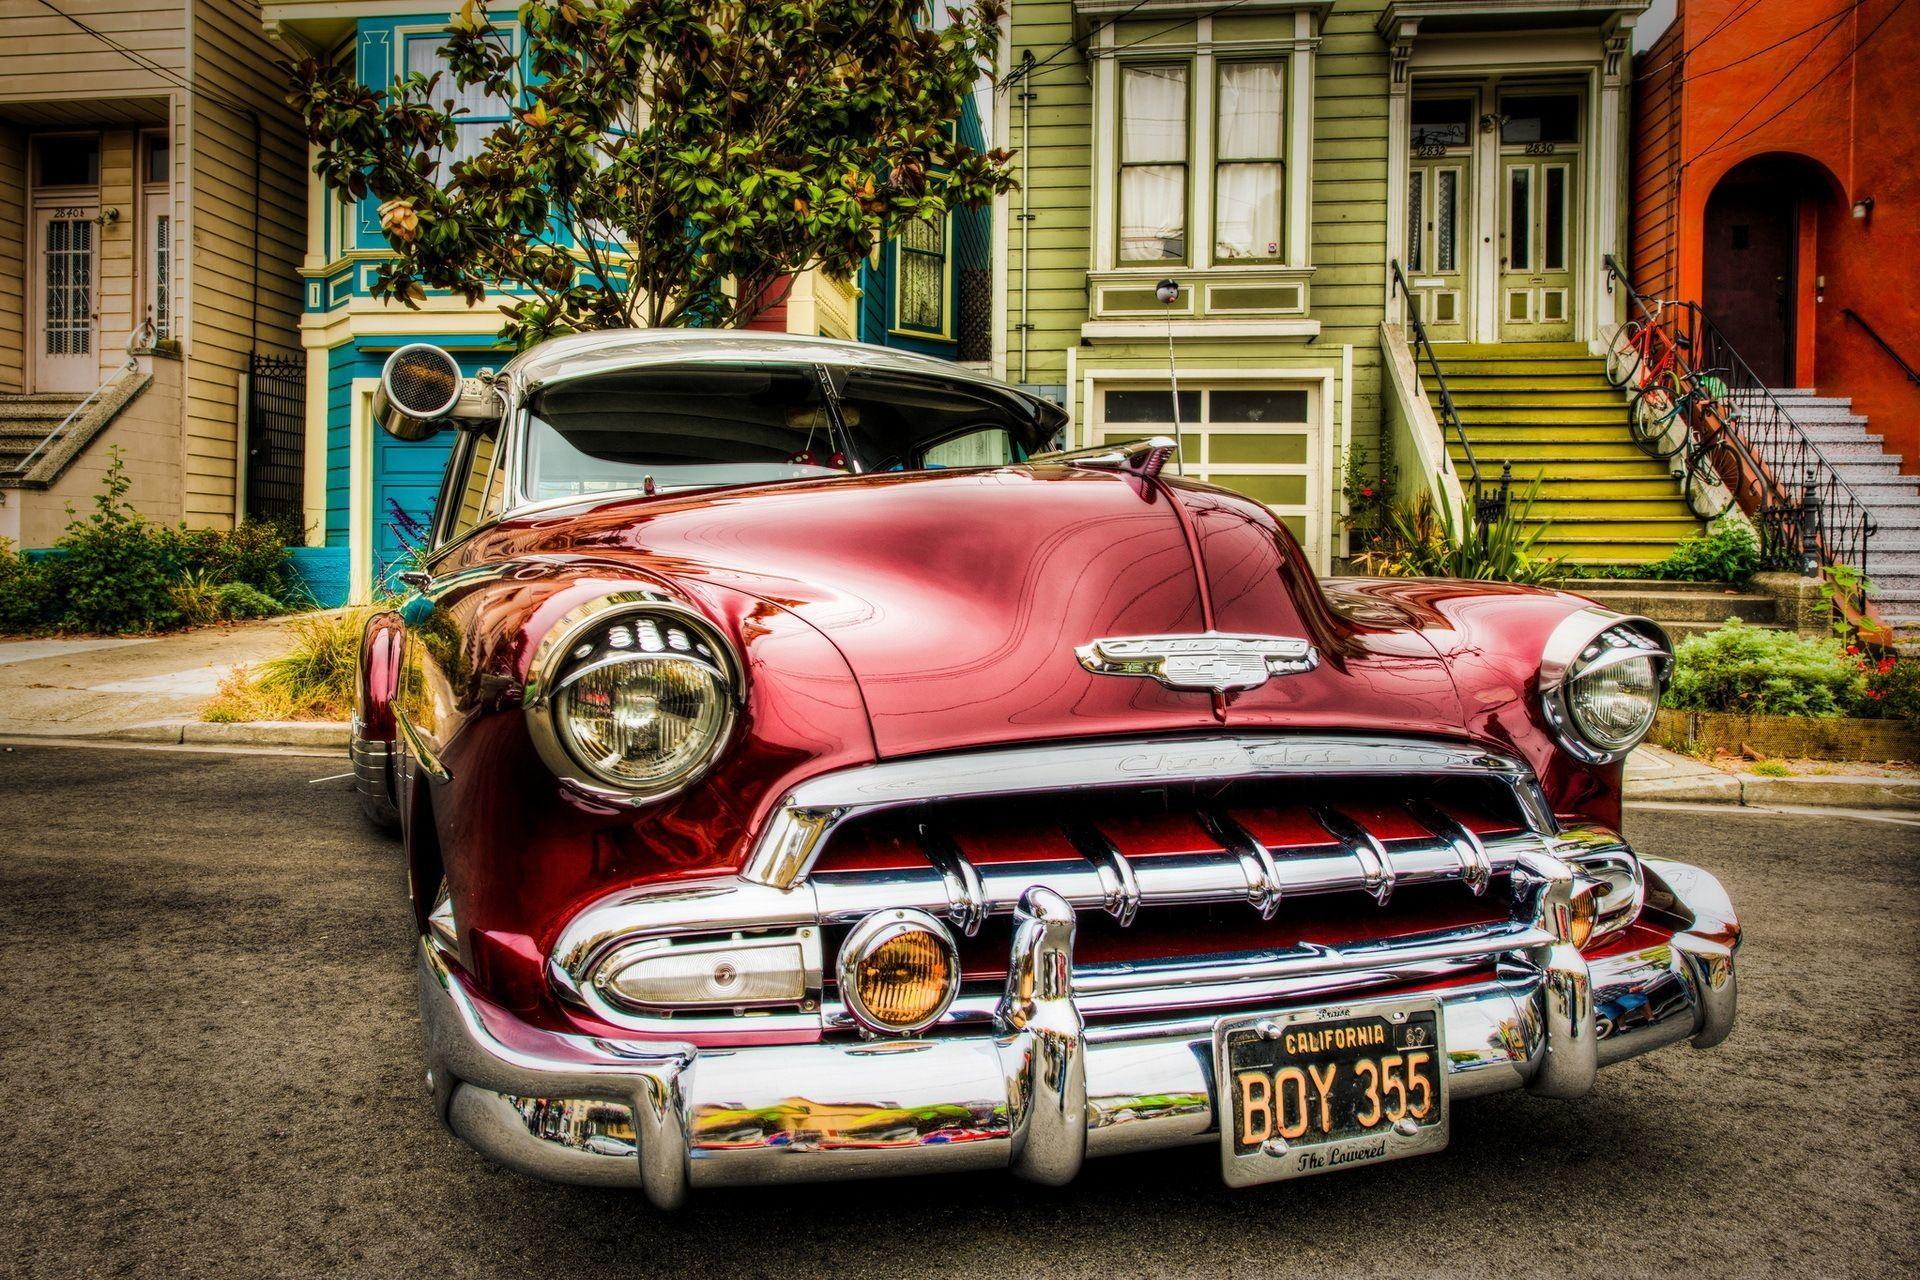 Download Lowrider Wallpapers 818apk for Android  apkdlin